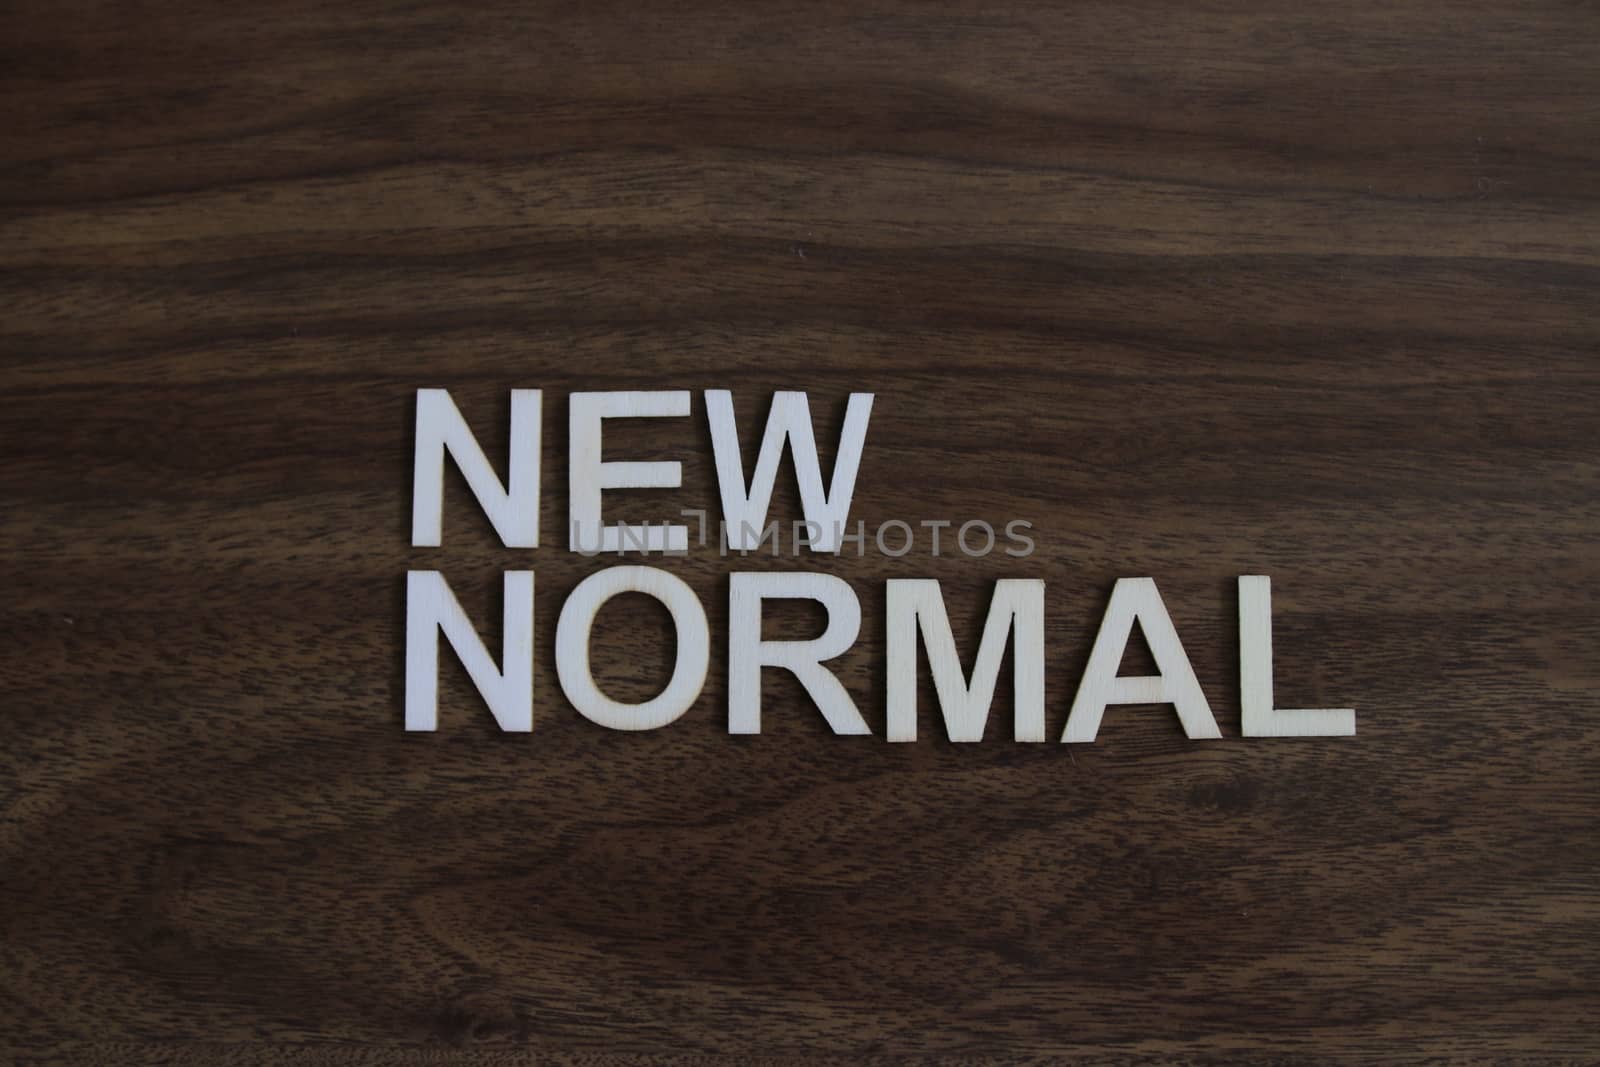 the term new normal on wood background. High quality photo